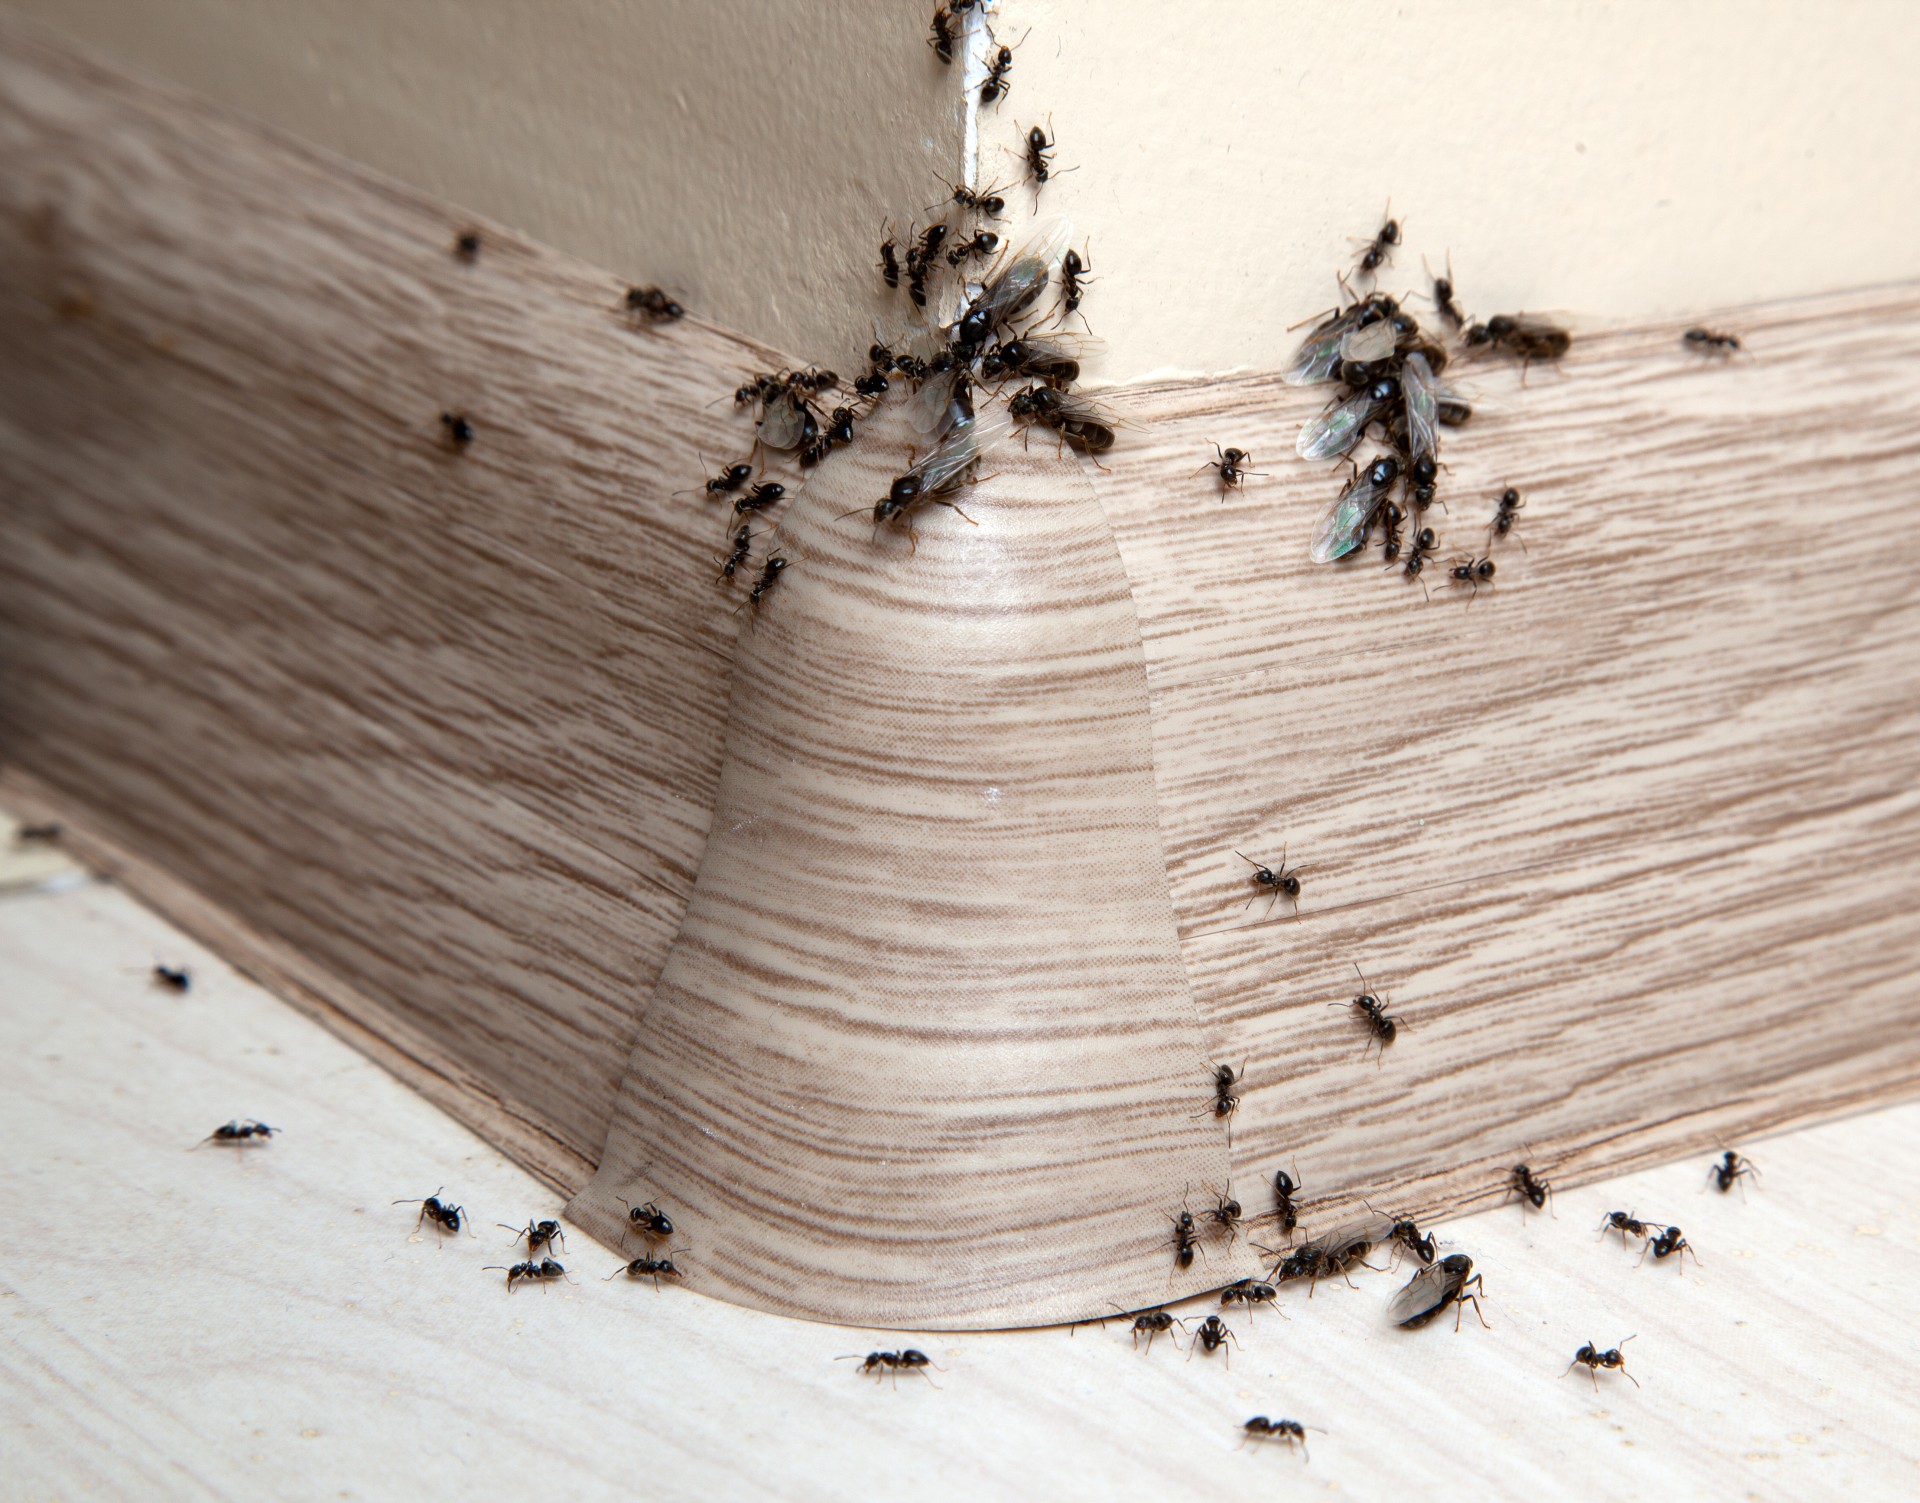 Ant Infestation, Pest Control in Lower Edmonton, N9. Call Now 020 8166 9746